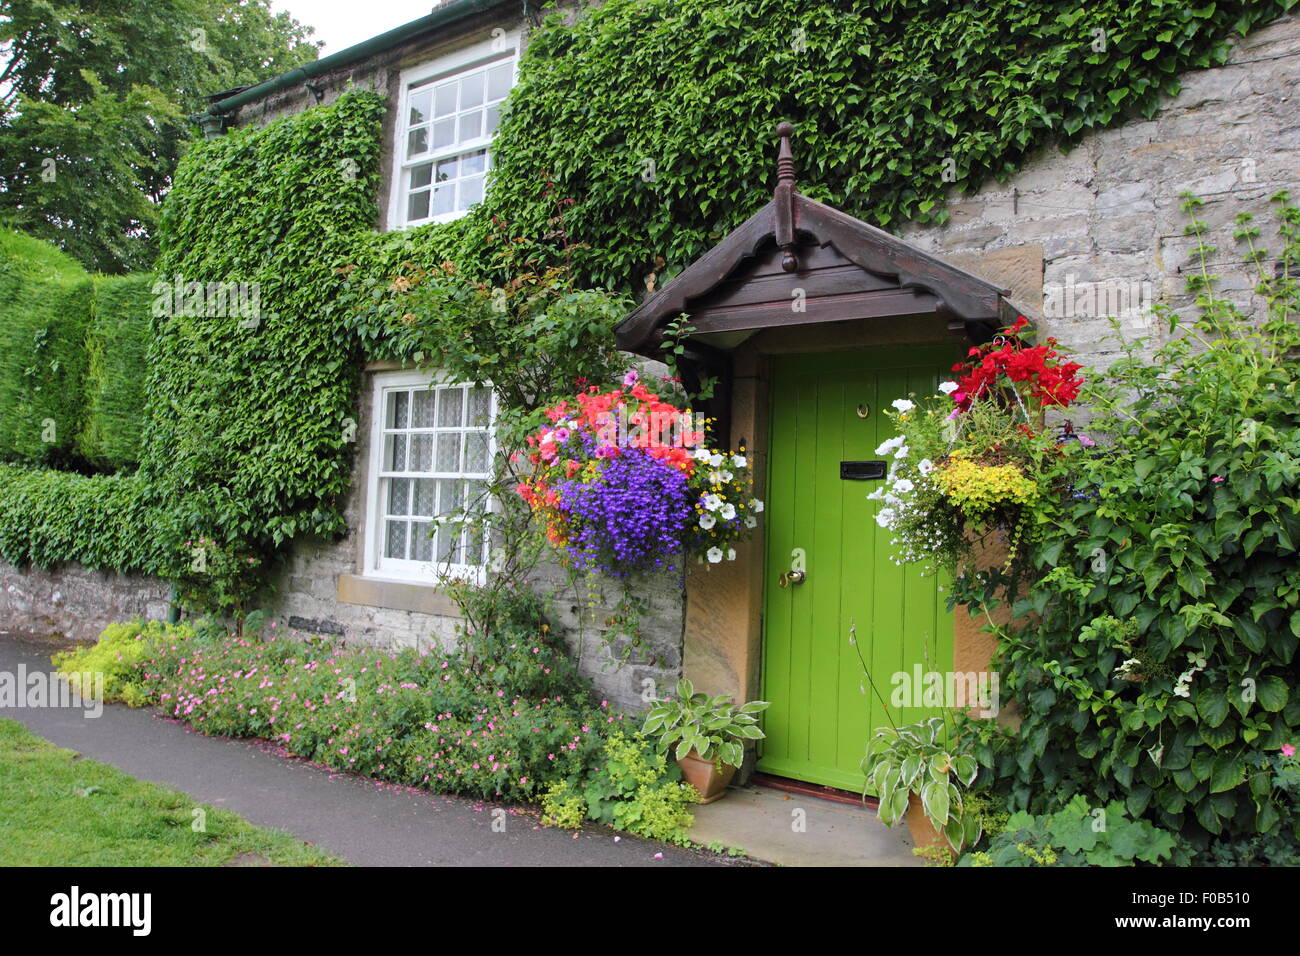 Hanging baskets frame the door to a traditional stone cottage in the Peak District, Derbyshire, England UK in summer Stock Photo